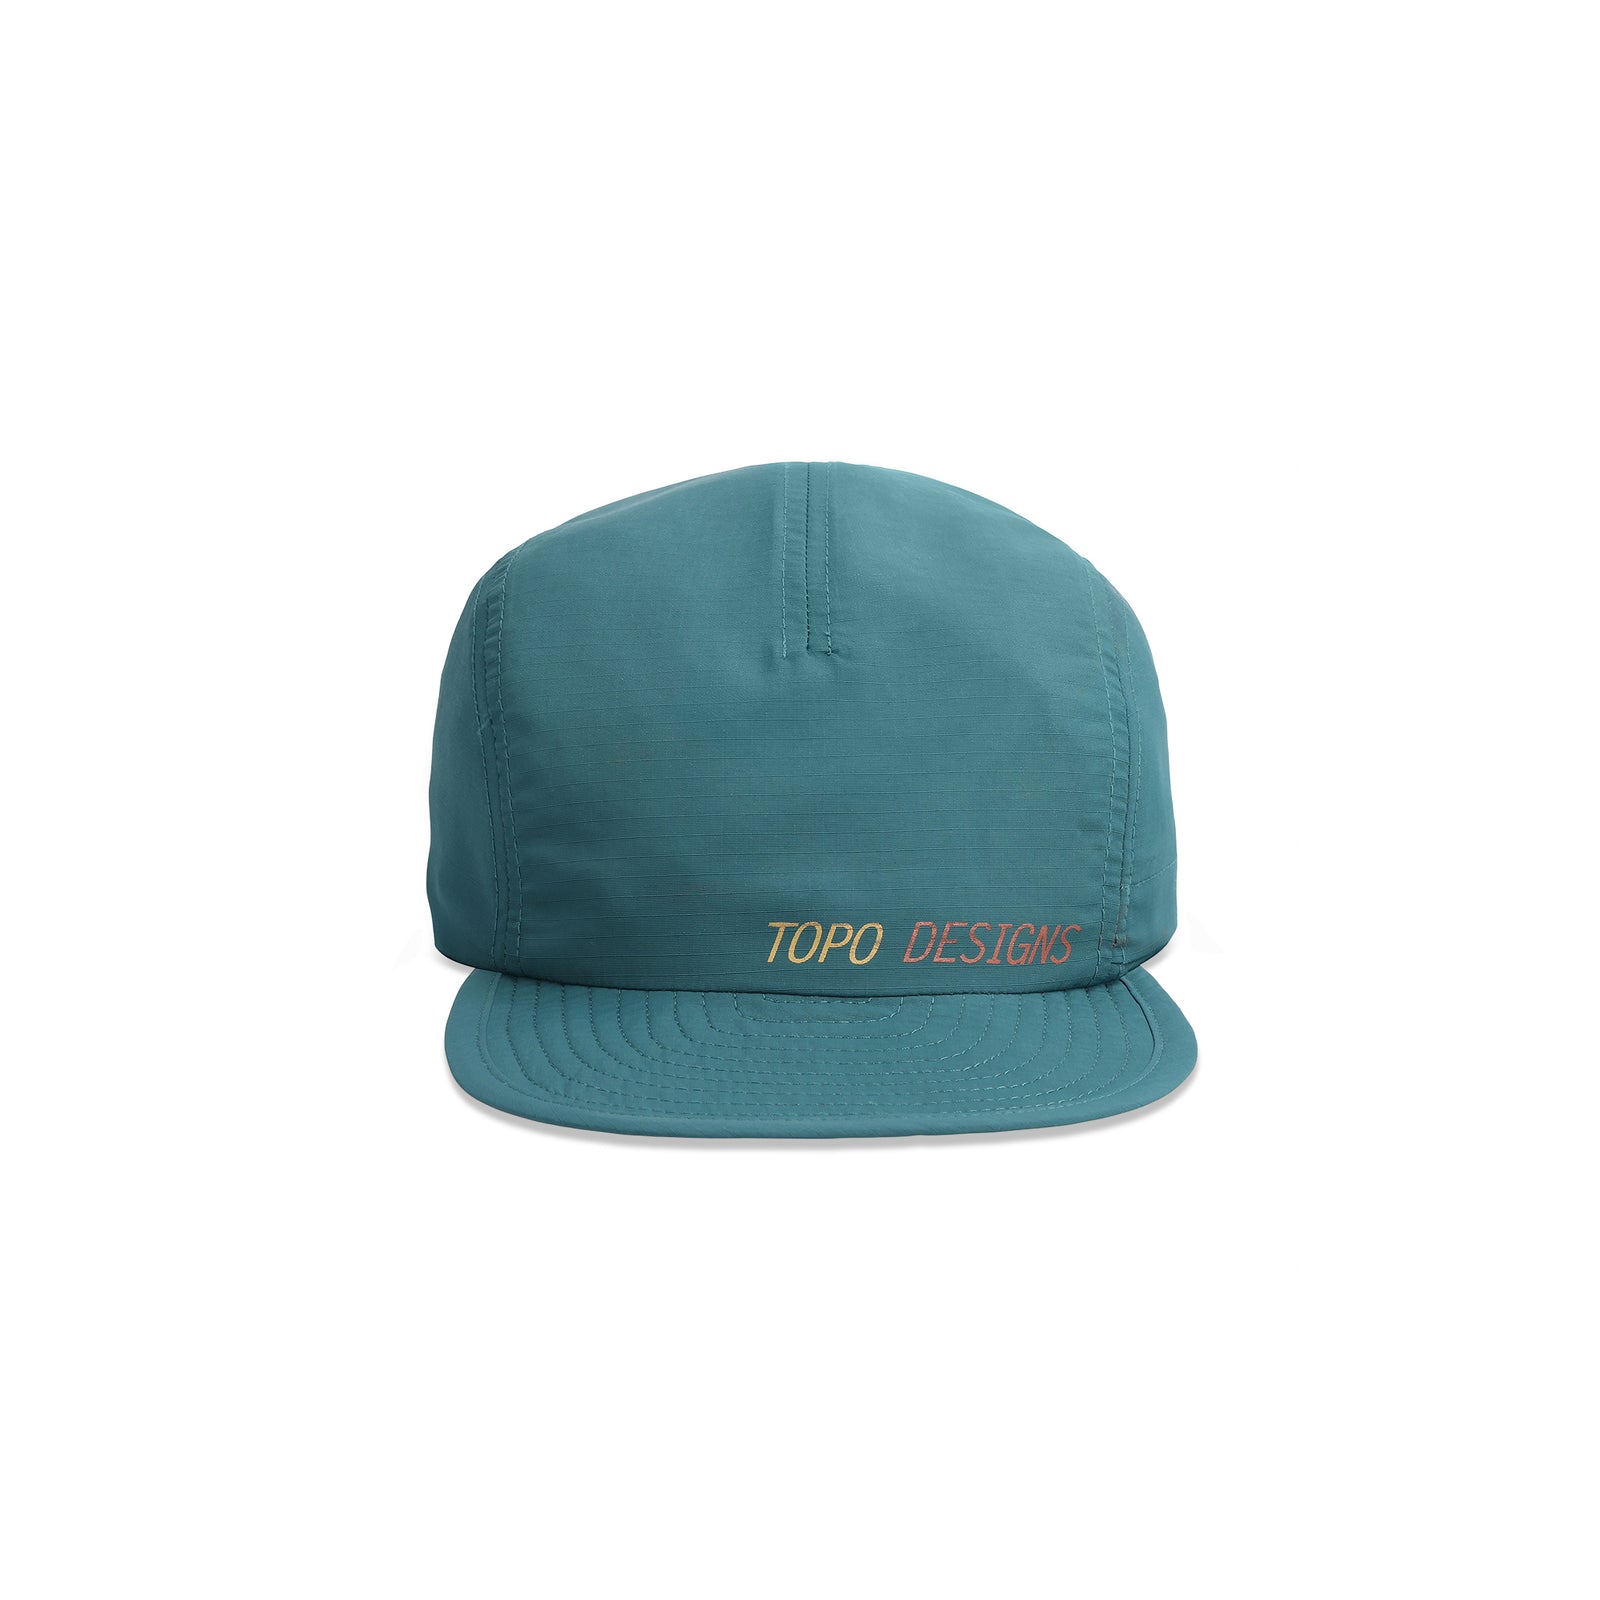 Front View of Topo Designs Global Packable Hat in "Pond Blue"